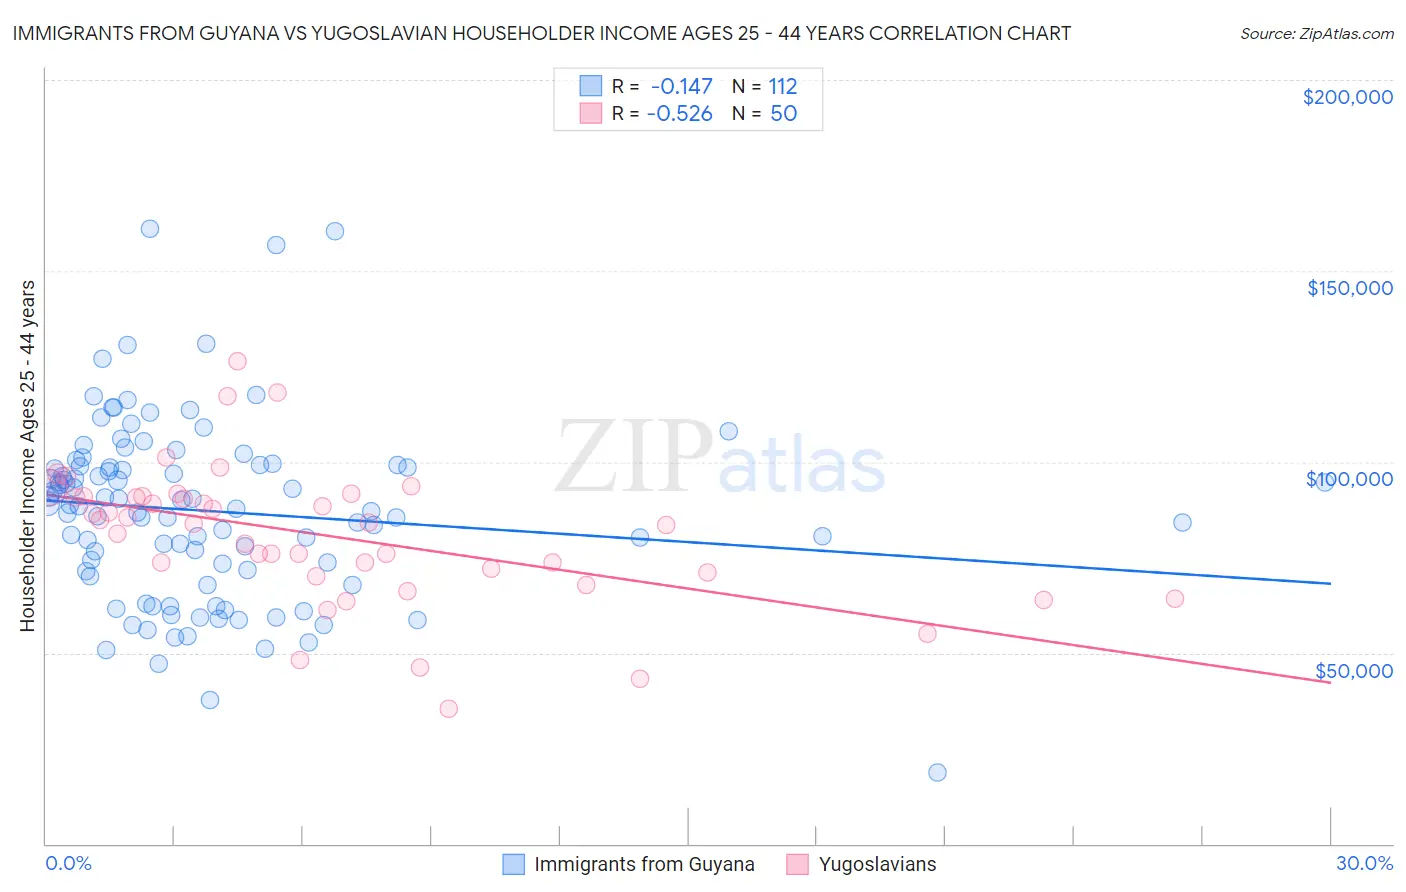 Immigrants from Guyana vs Yugoslavian Householder Income Ages 25 - 44 years